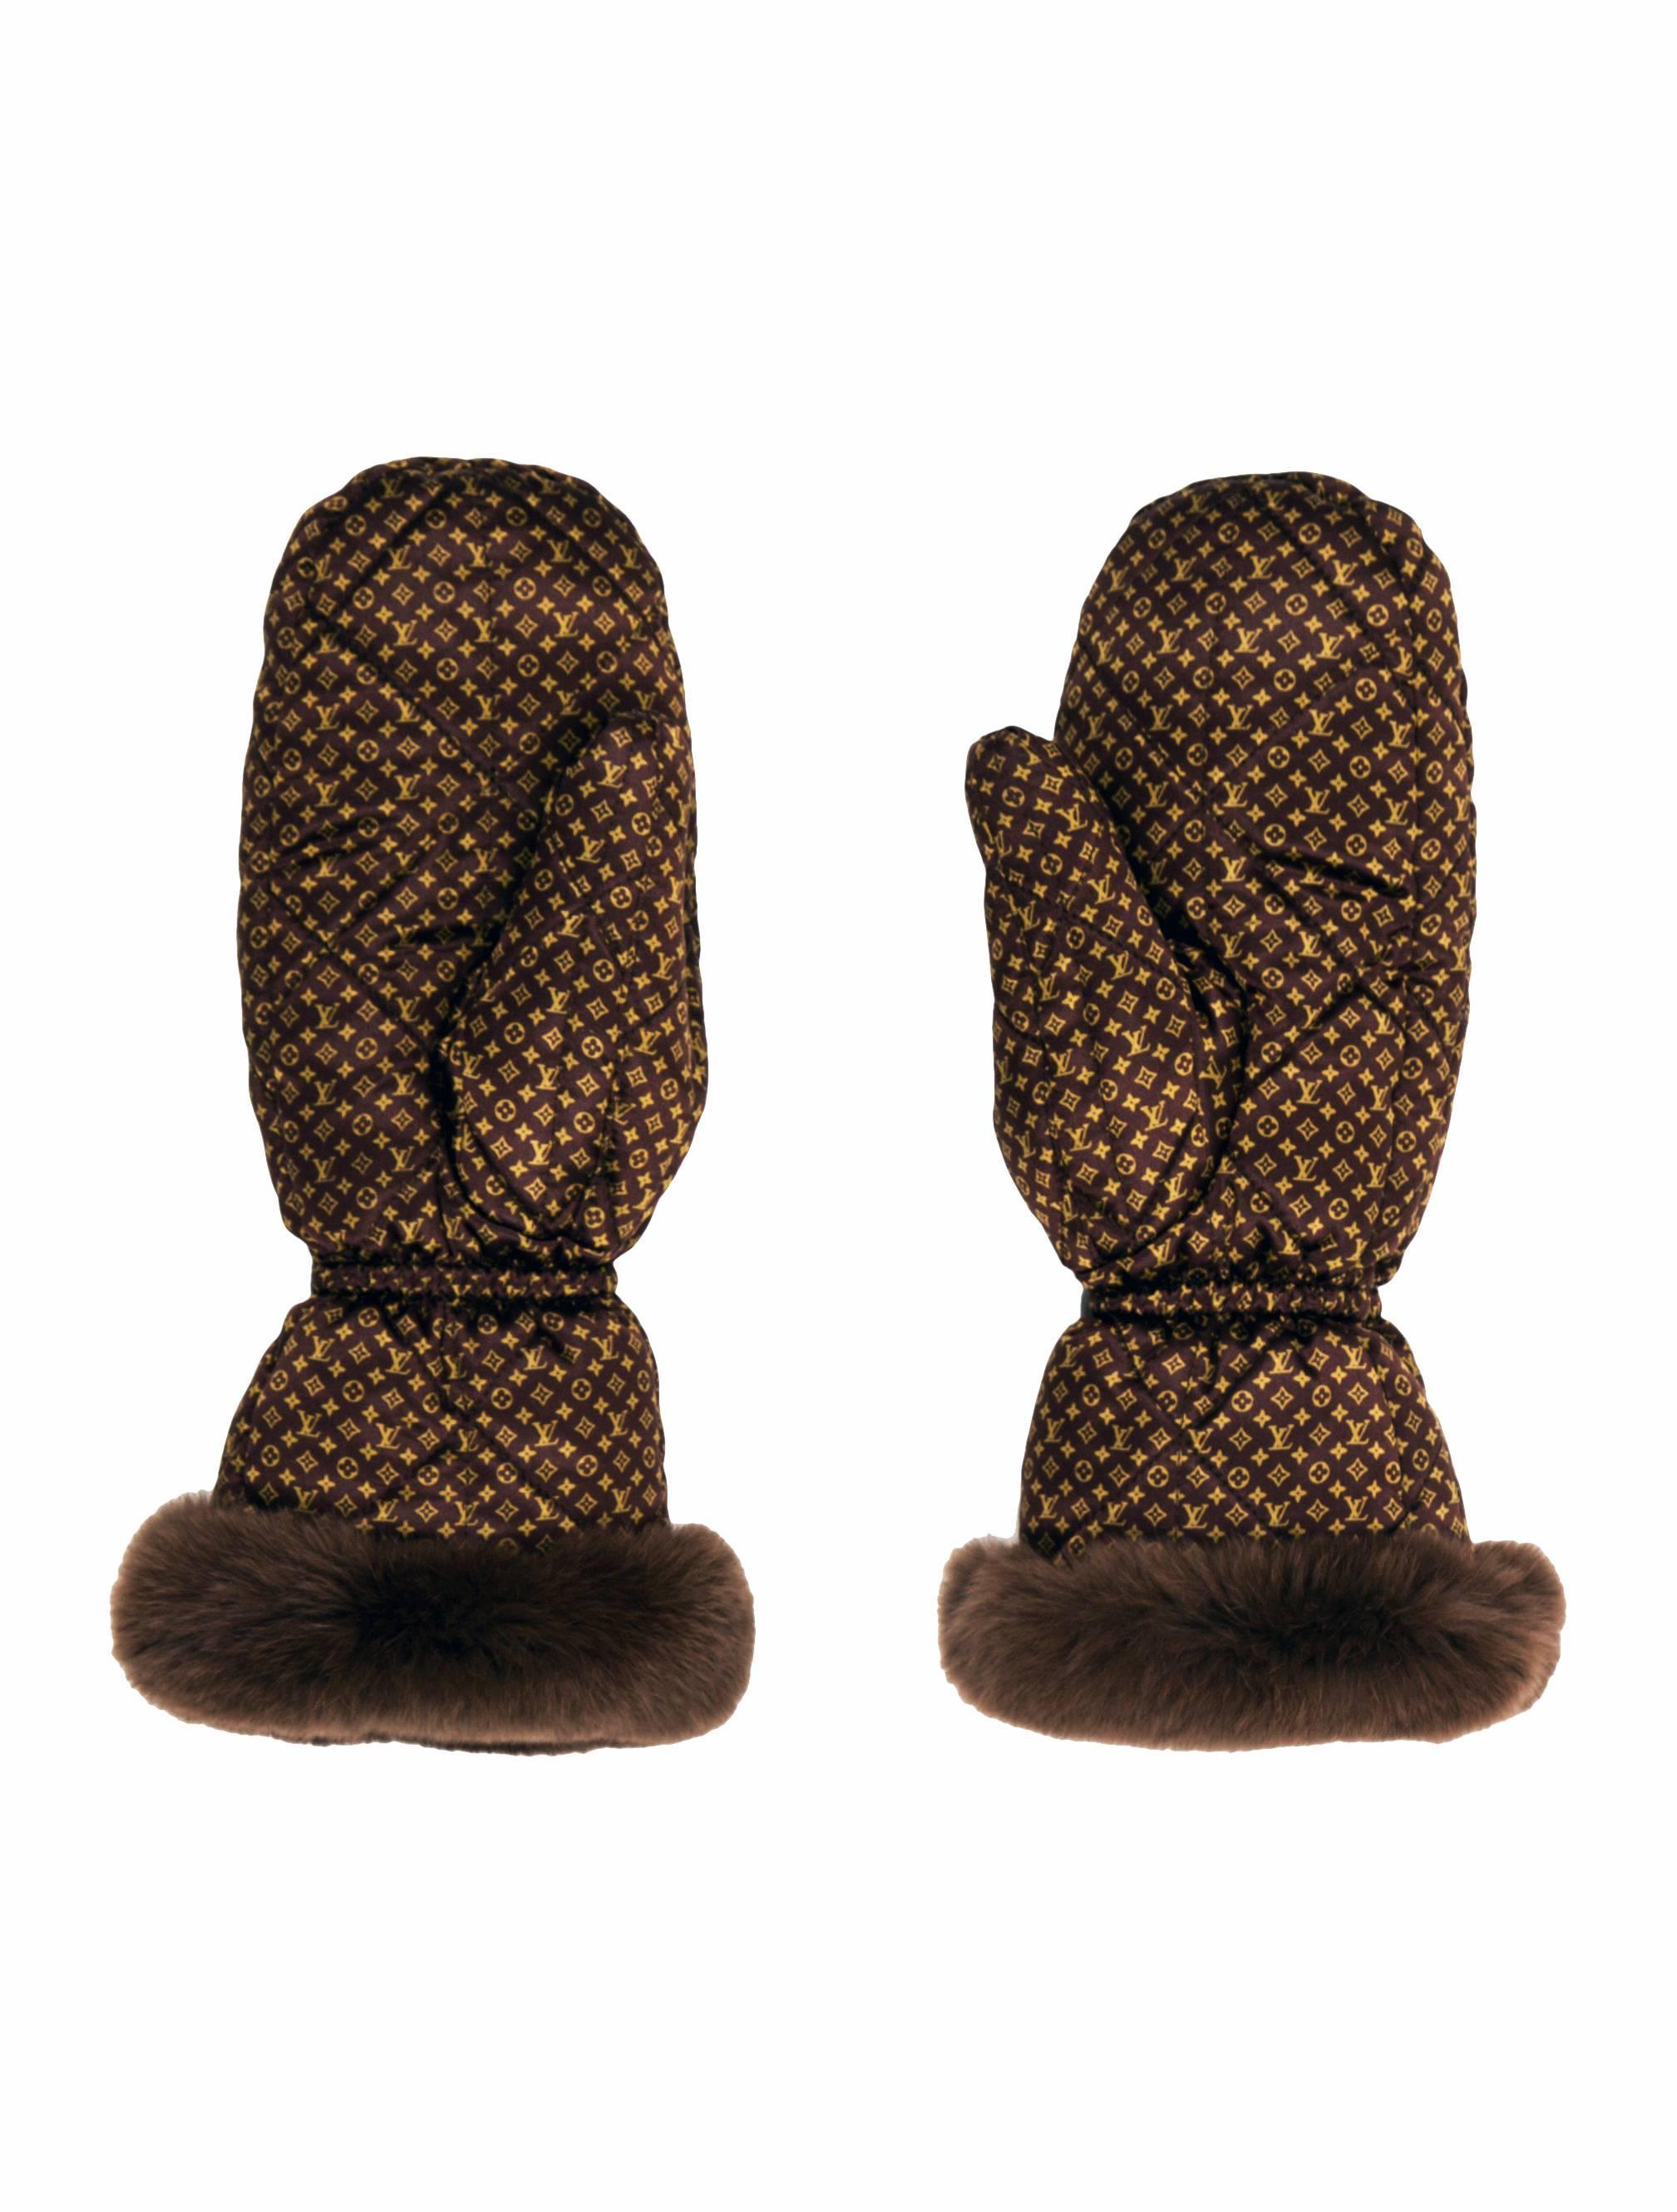 Louis Vuitton Signature Monogram warm mittens completely lined in rabbit fur.
Gold Louis Vuitton Plate on top of both mittens.

New in Box

Measure 12.50